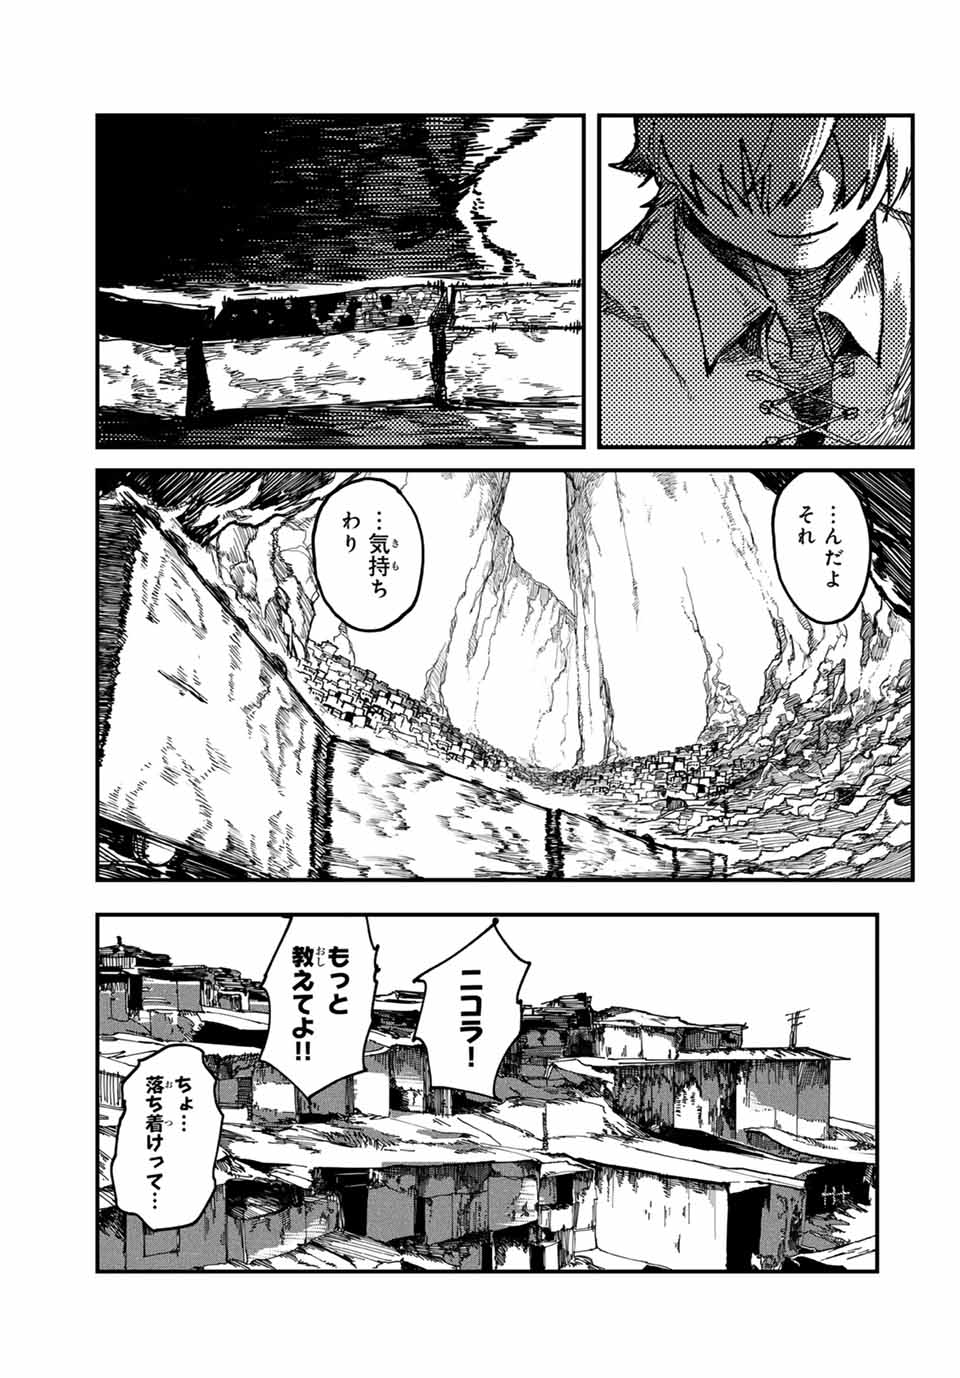 MAN OF RUST 第1.1話 - Page 23